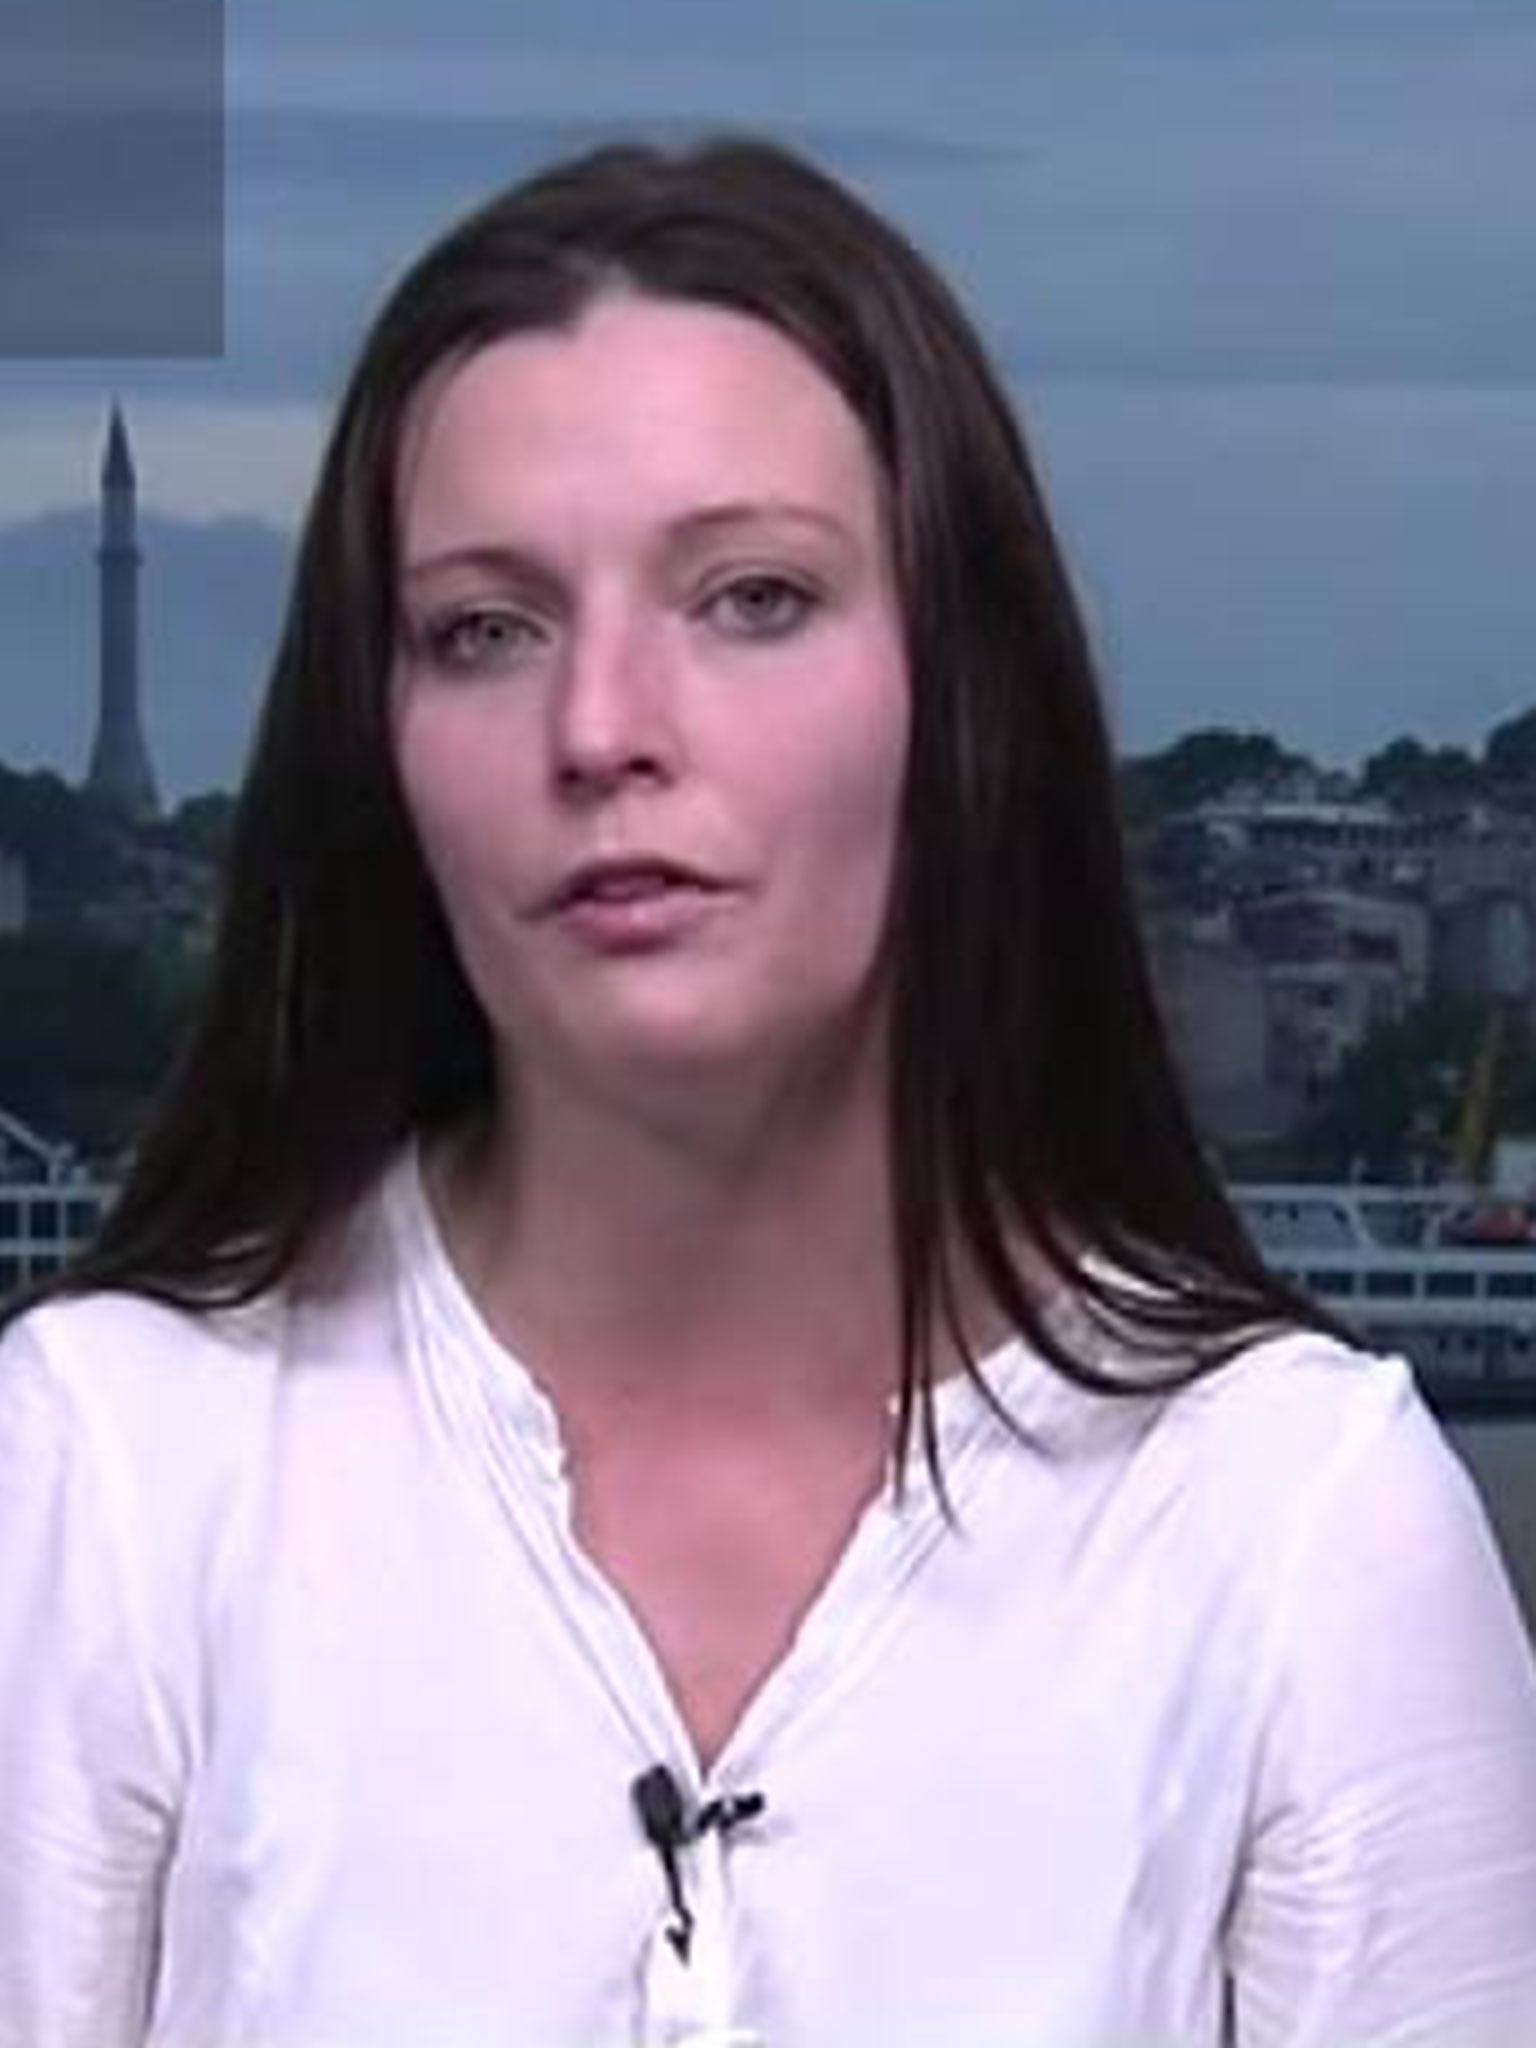 Sara Firth, a presenter for Russia Today (RT) has resigned from her job over the broadcaster’s coverage of the Malaysia Airlines flight MH17 crash in Ukraine.